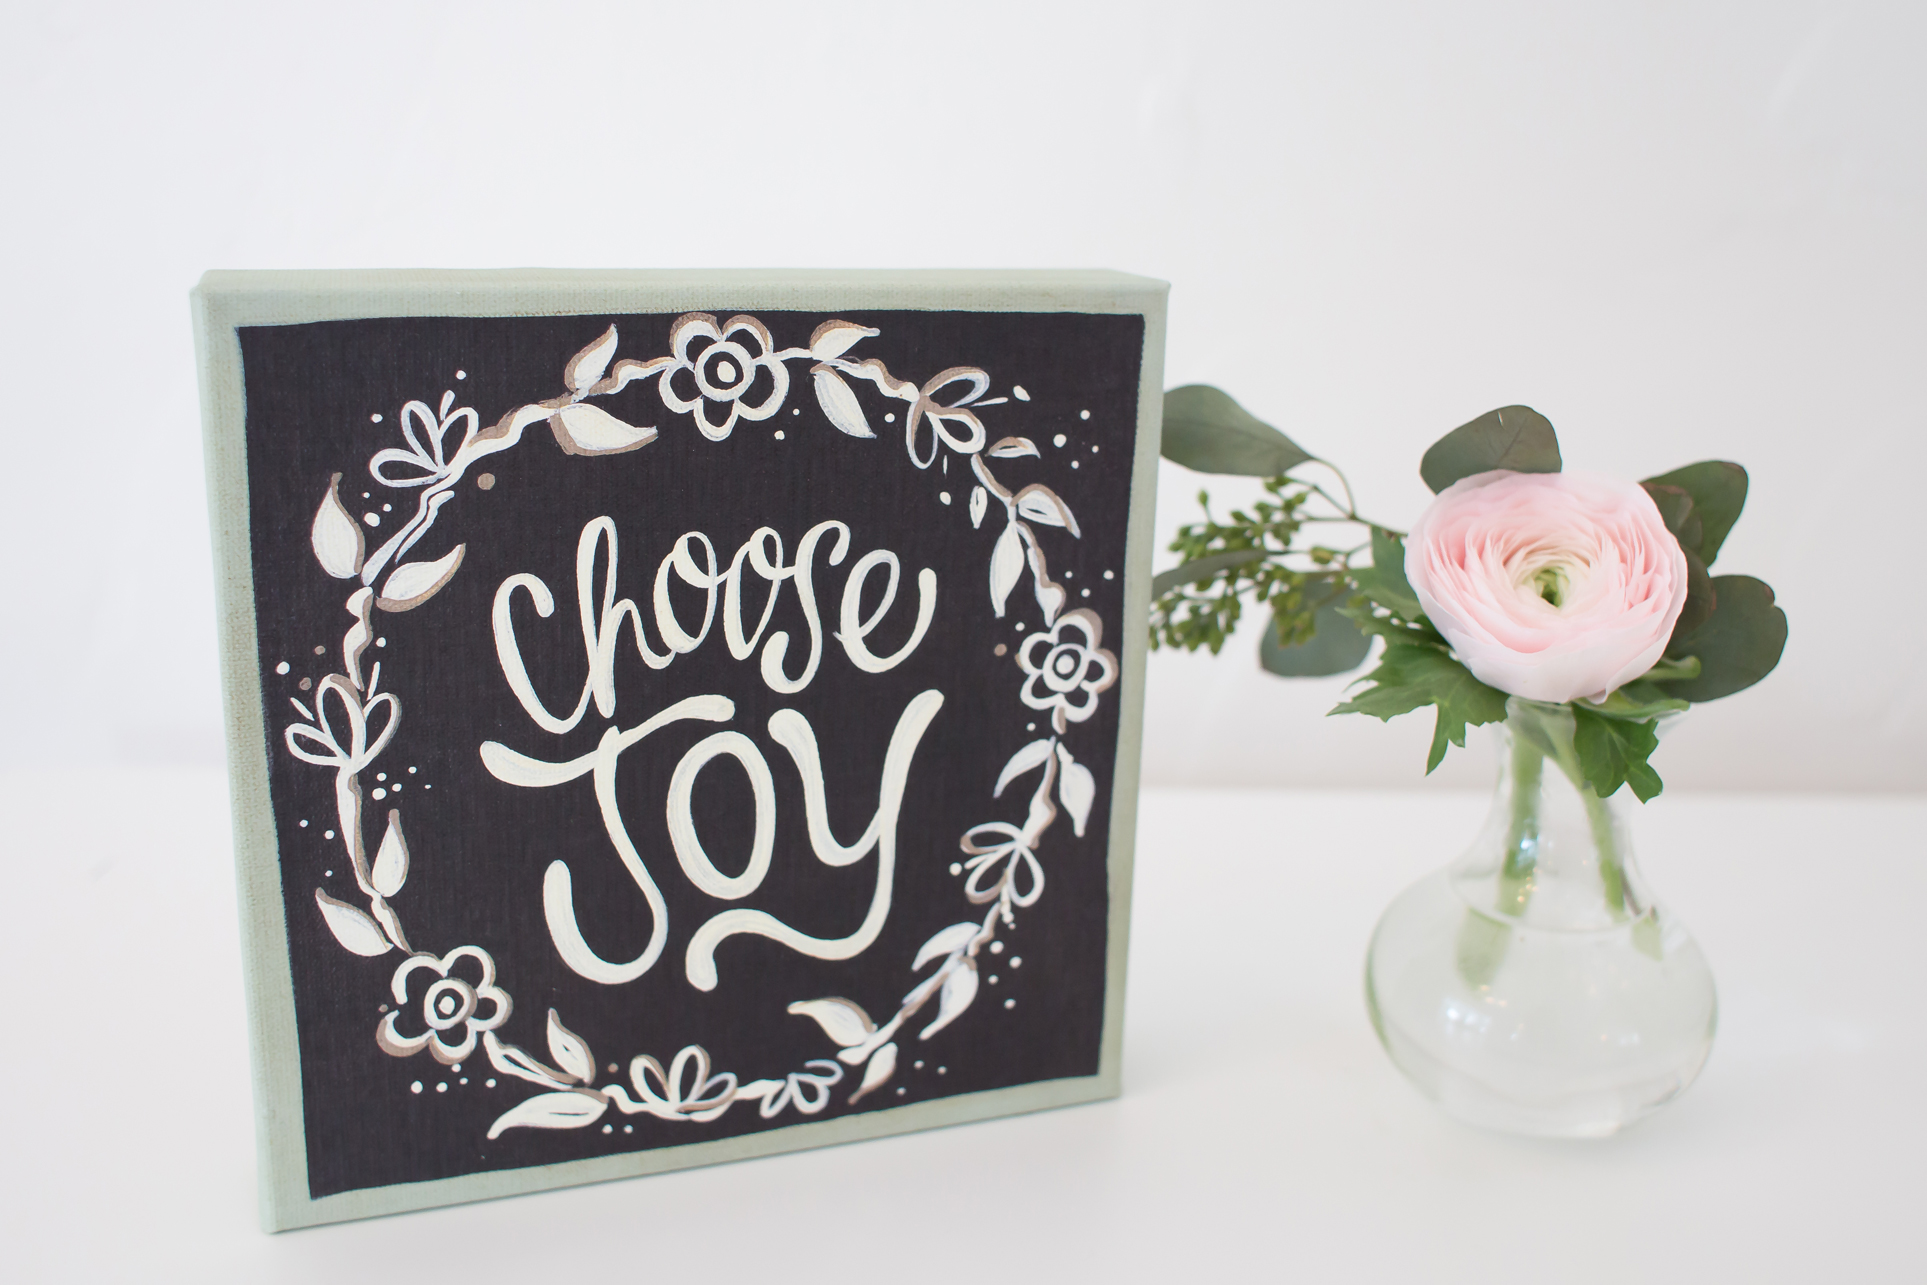 Get our new Choose Joy Canvas for just $13.50 right now!